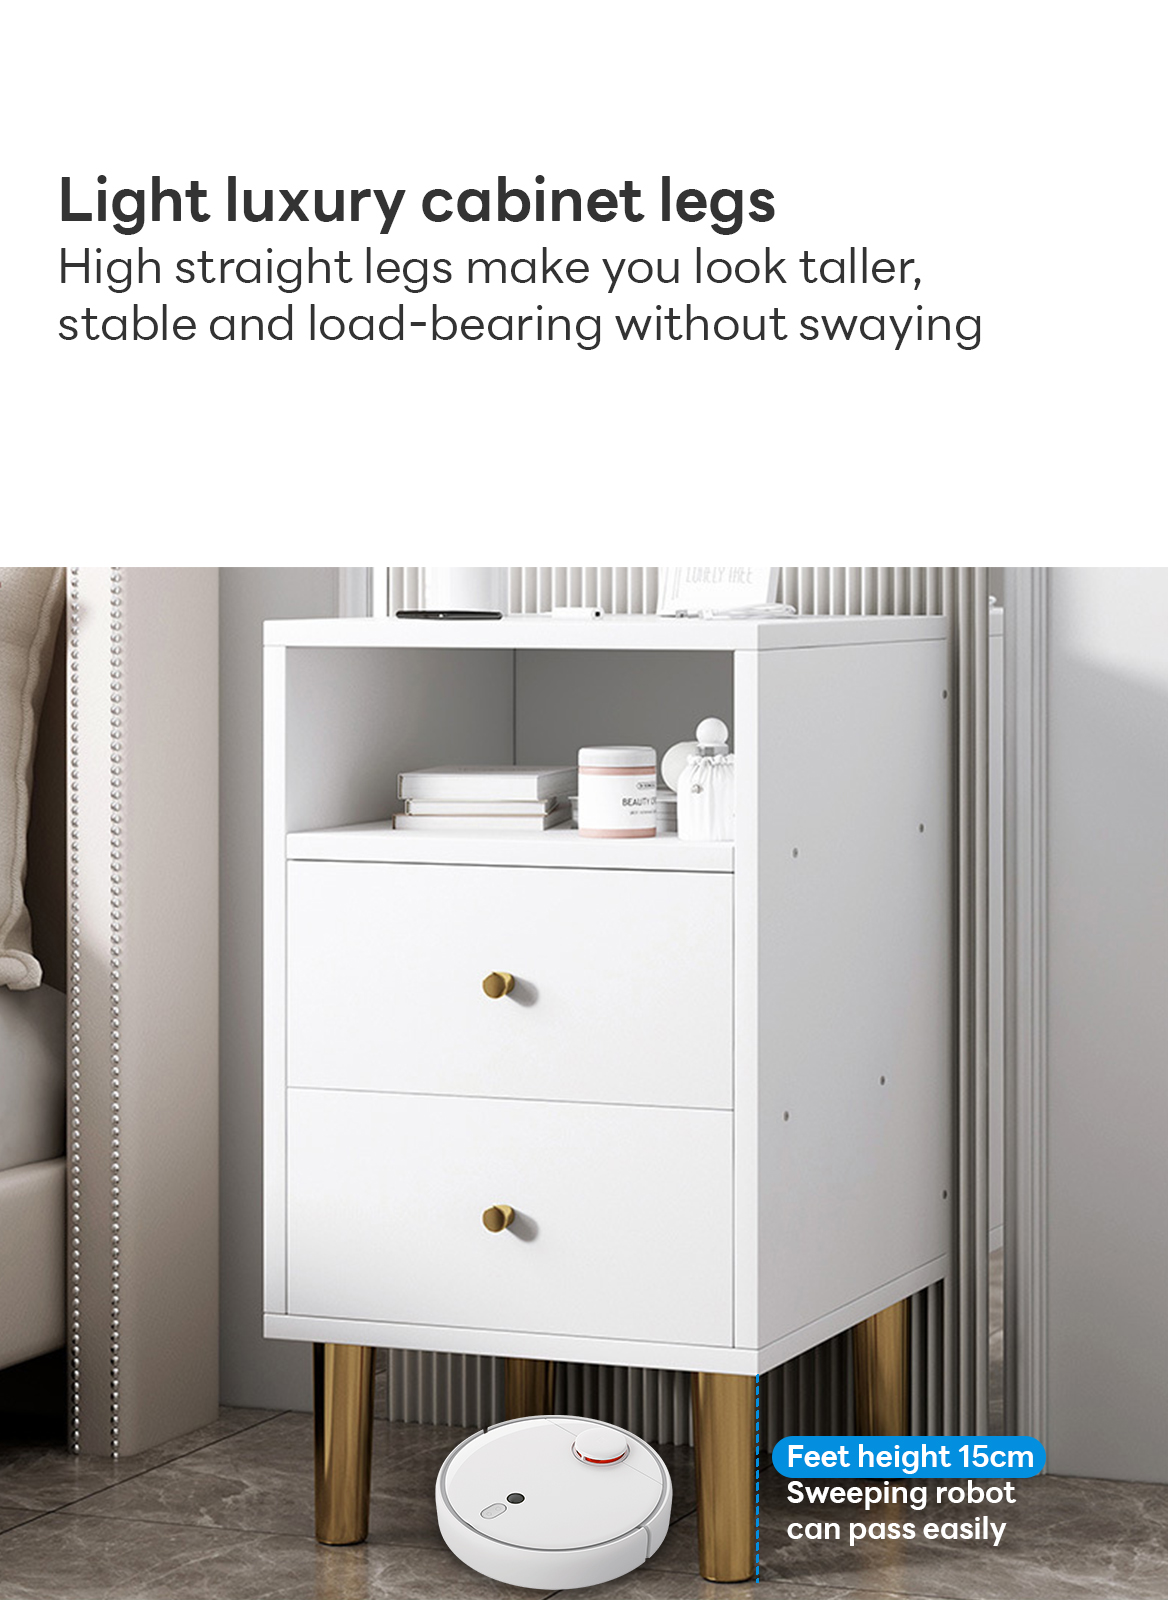 European-style Light Luxury Bedside Table With Drawers 35*40*58cm